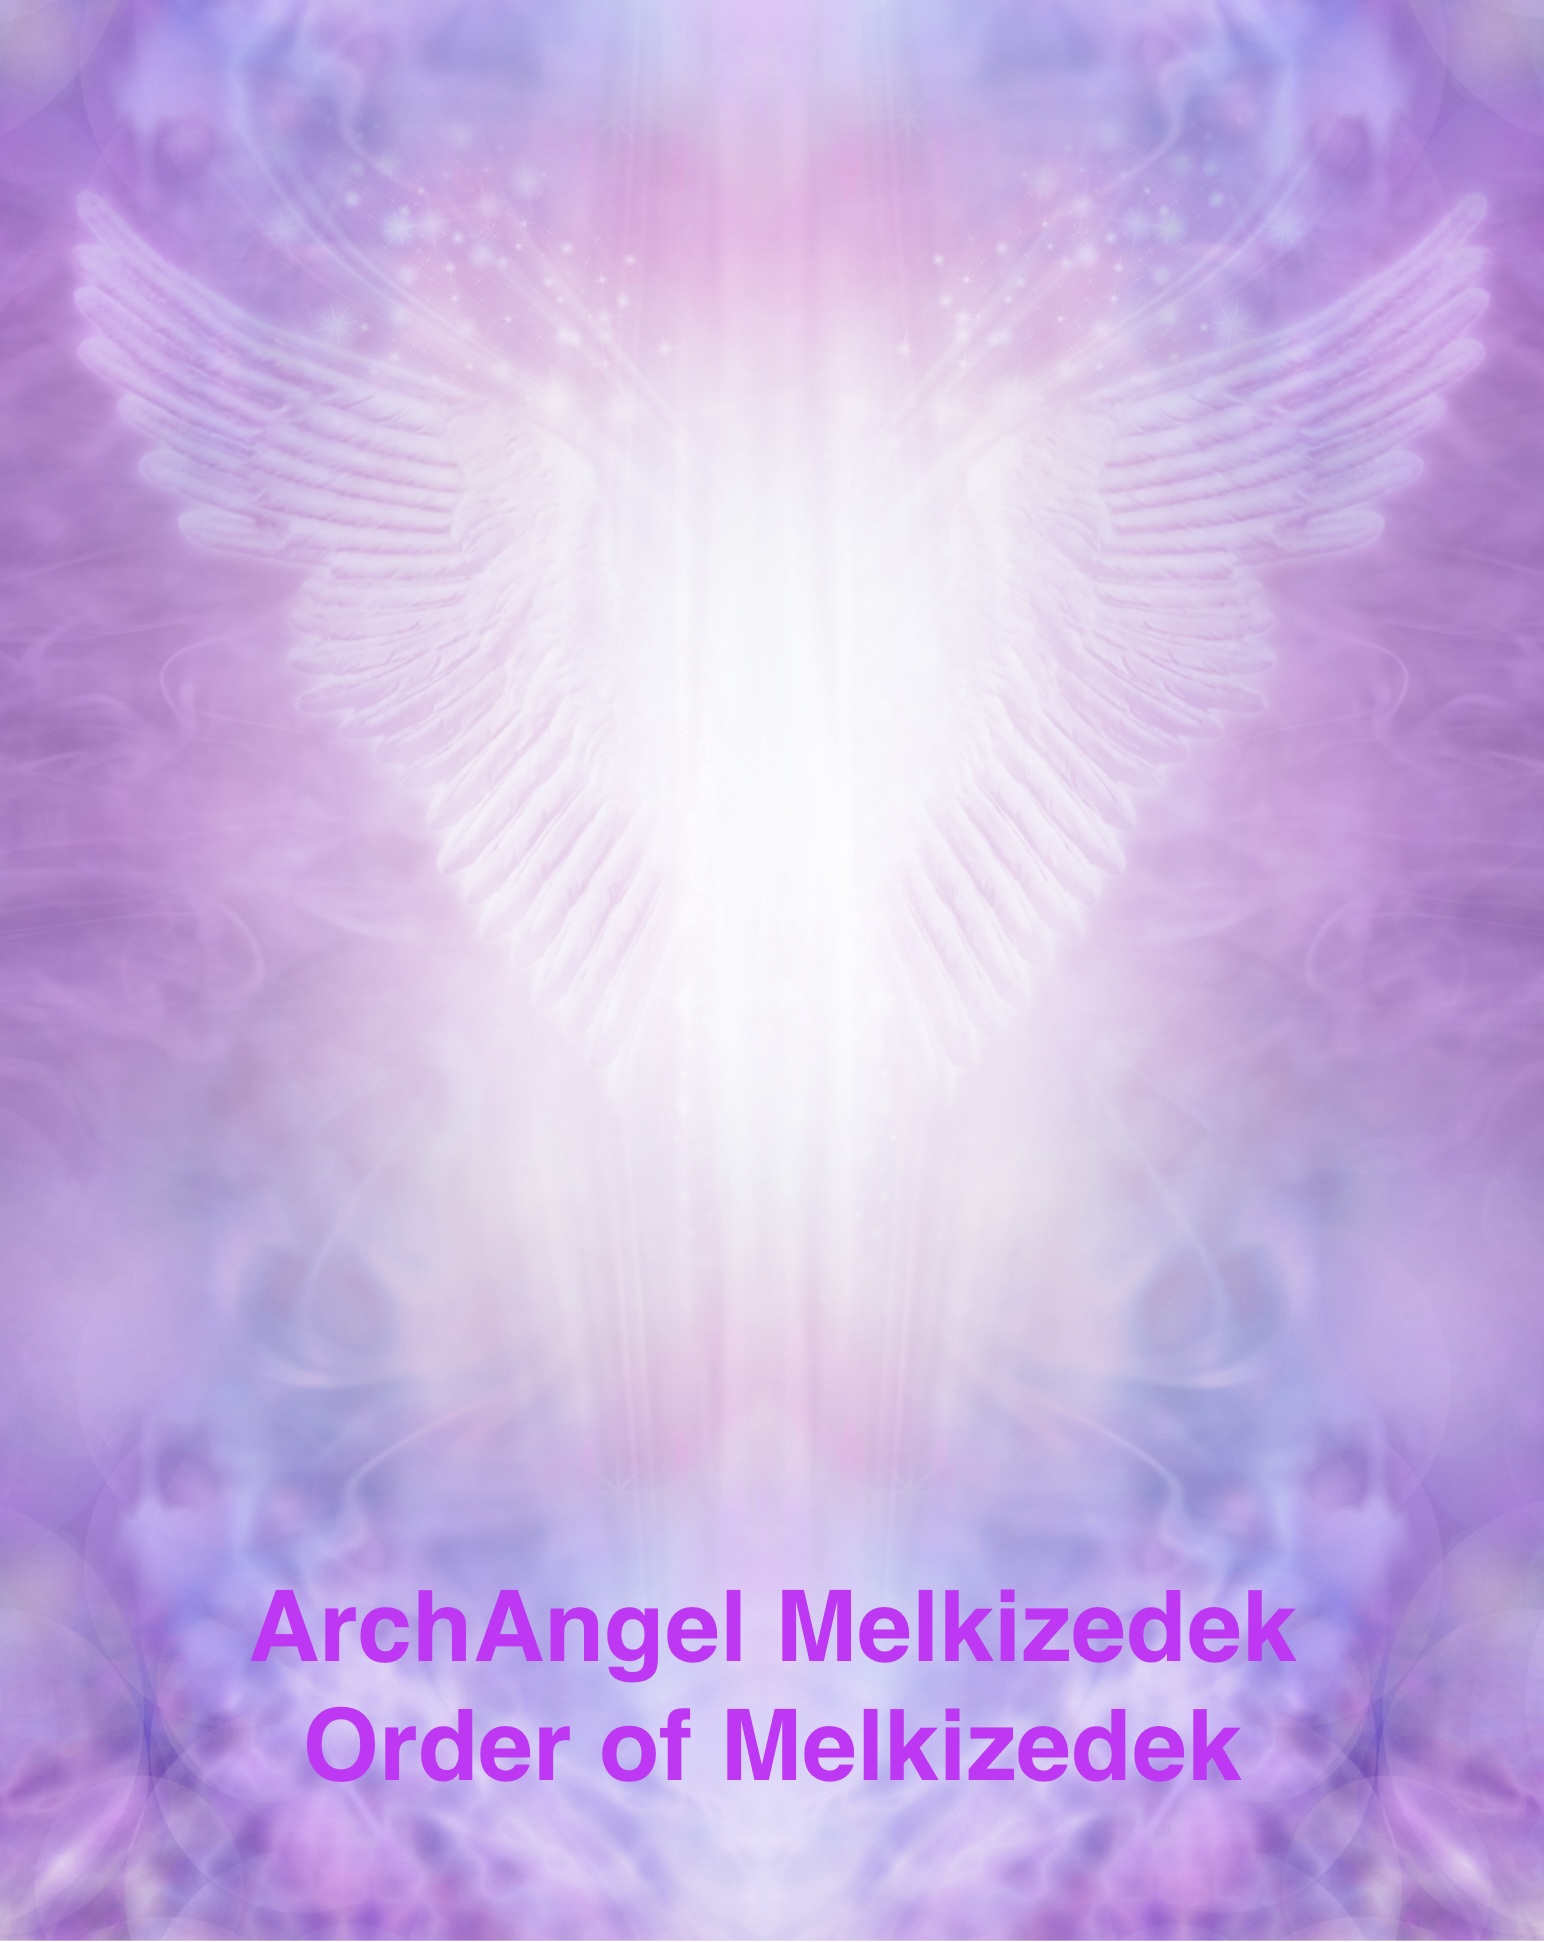 Lilac Angel Wings Certificate Award Diploma background